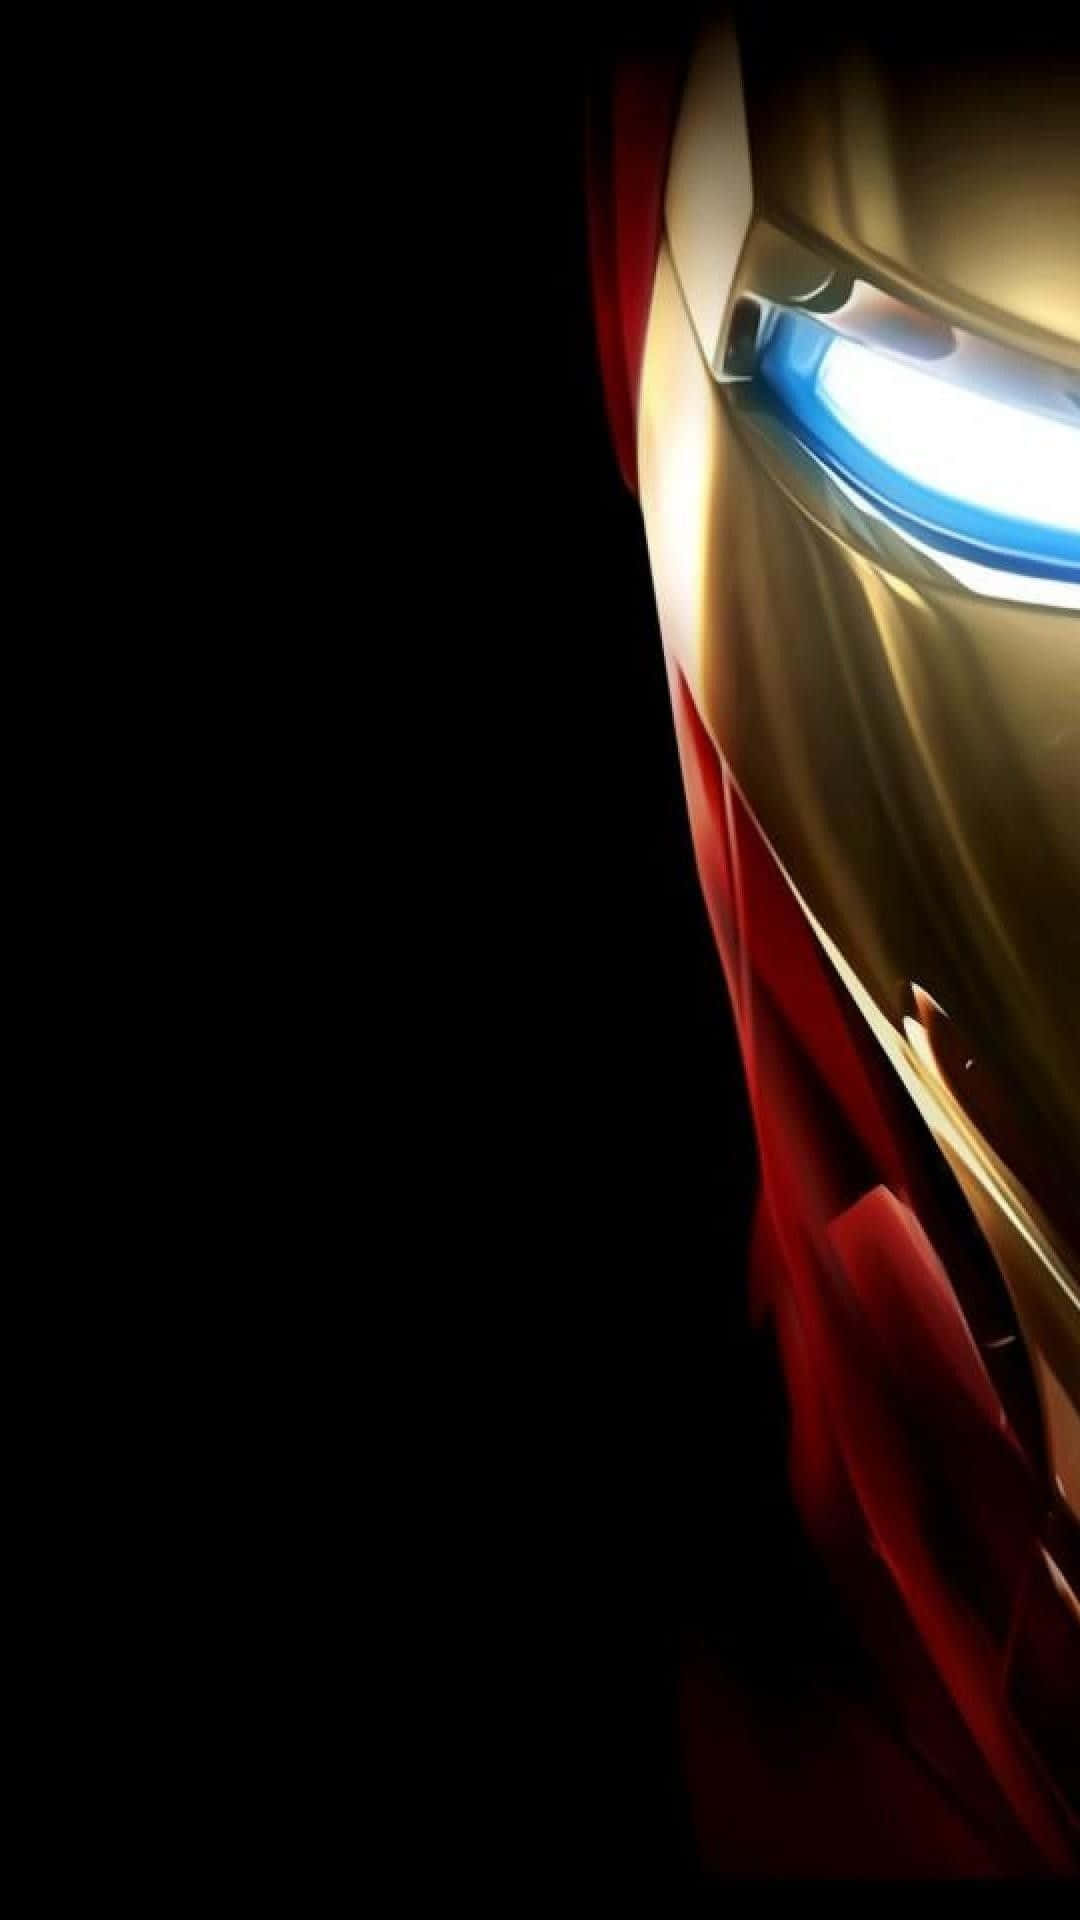 Put together the power of Iron Man with the new iPhone X! Wallpaper